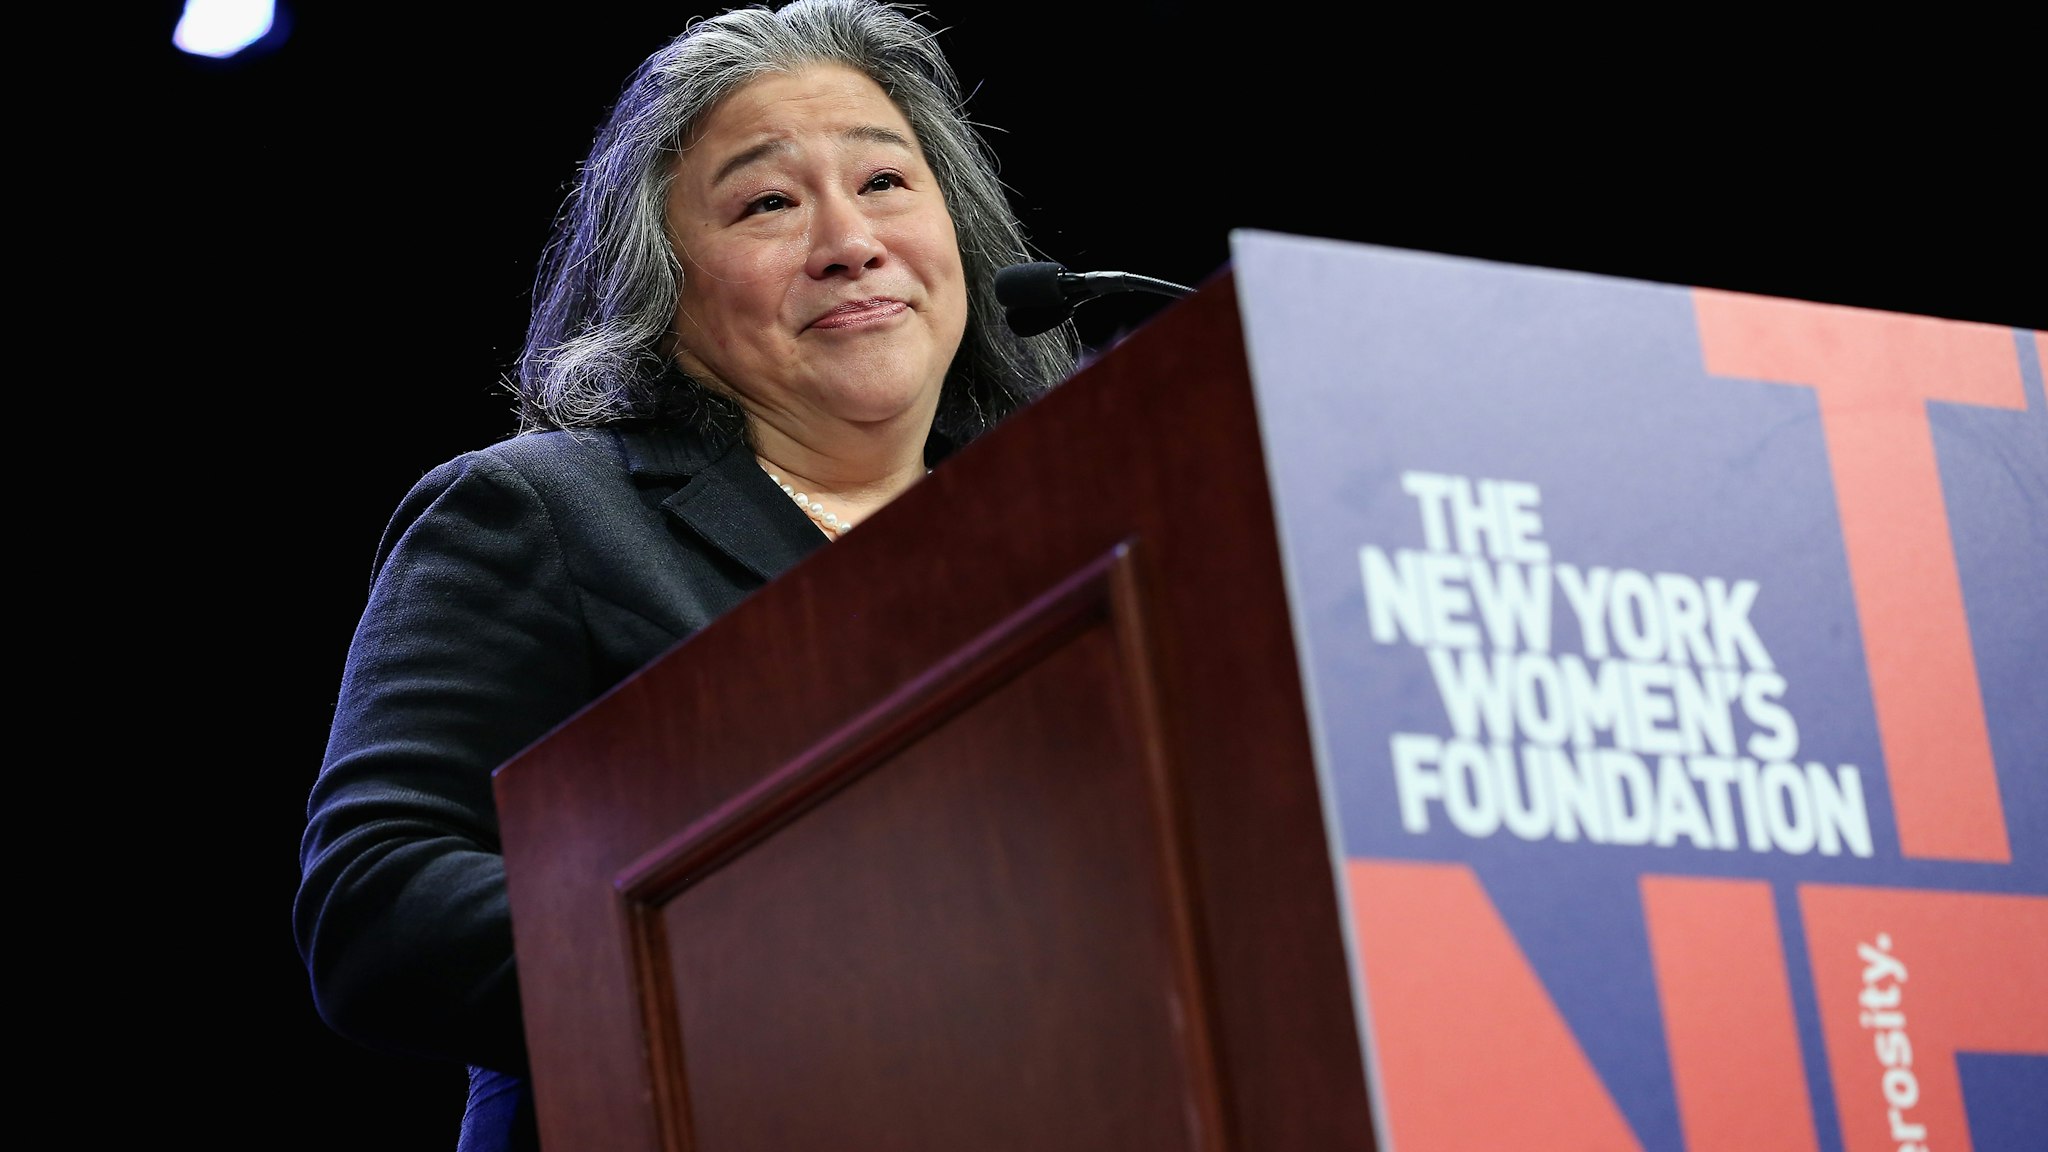 Times Up Legal Defence Fund, Tina Tchen speaks onstage during the New York Women's Foundation's 2018 "Celebrating Women" breakfast on May 10, 2018 in New York City.